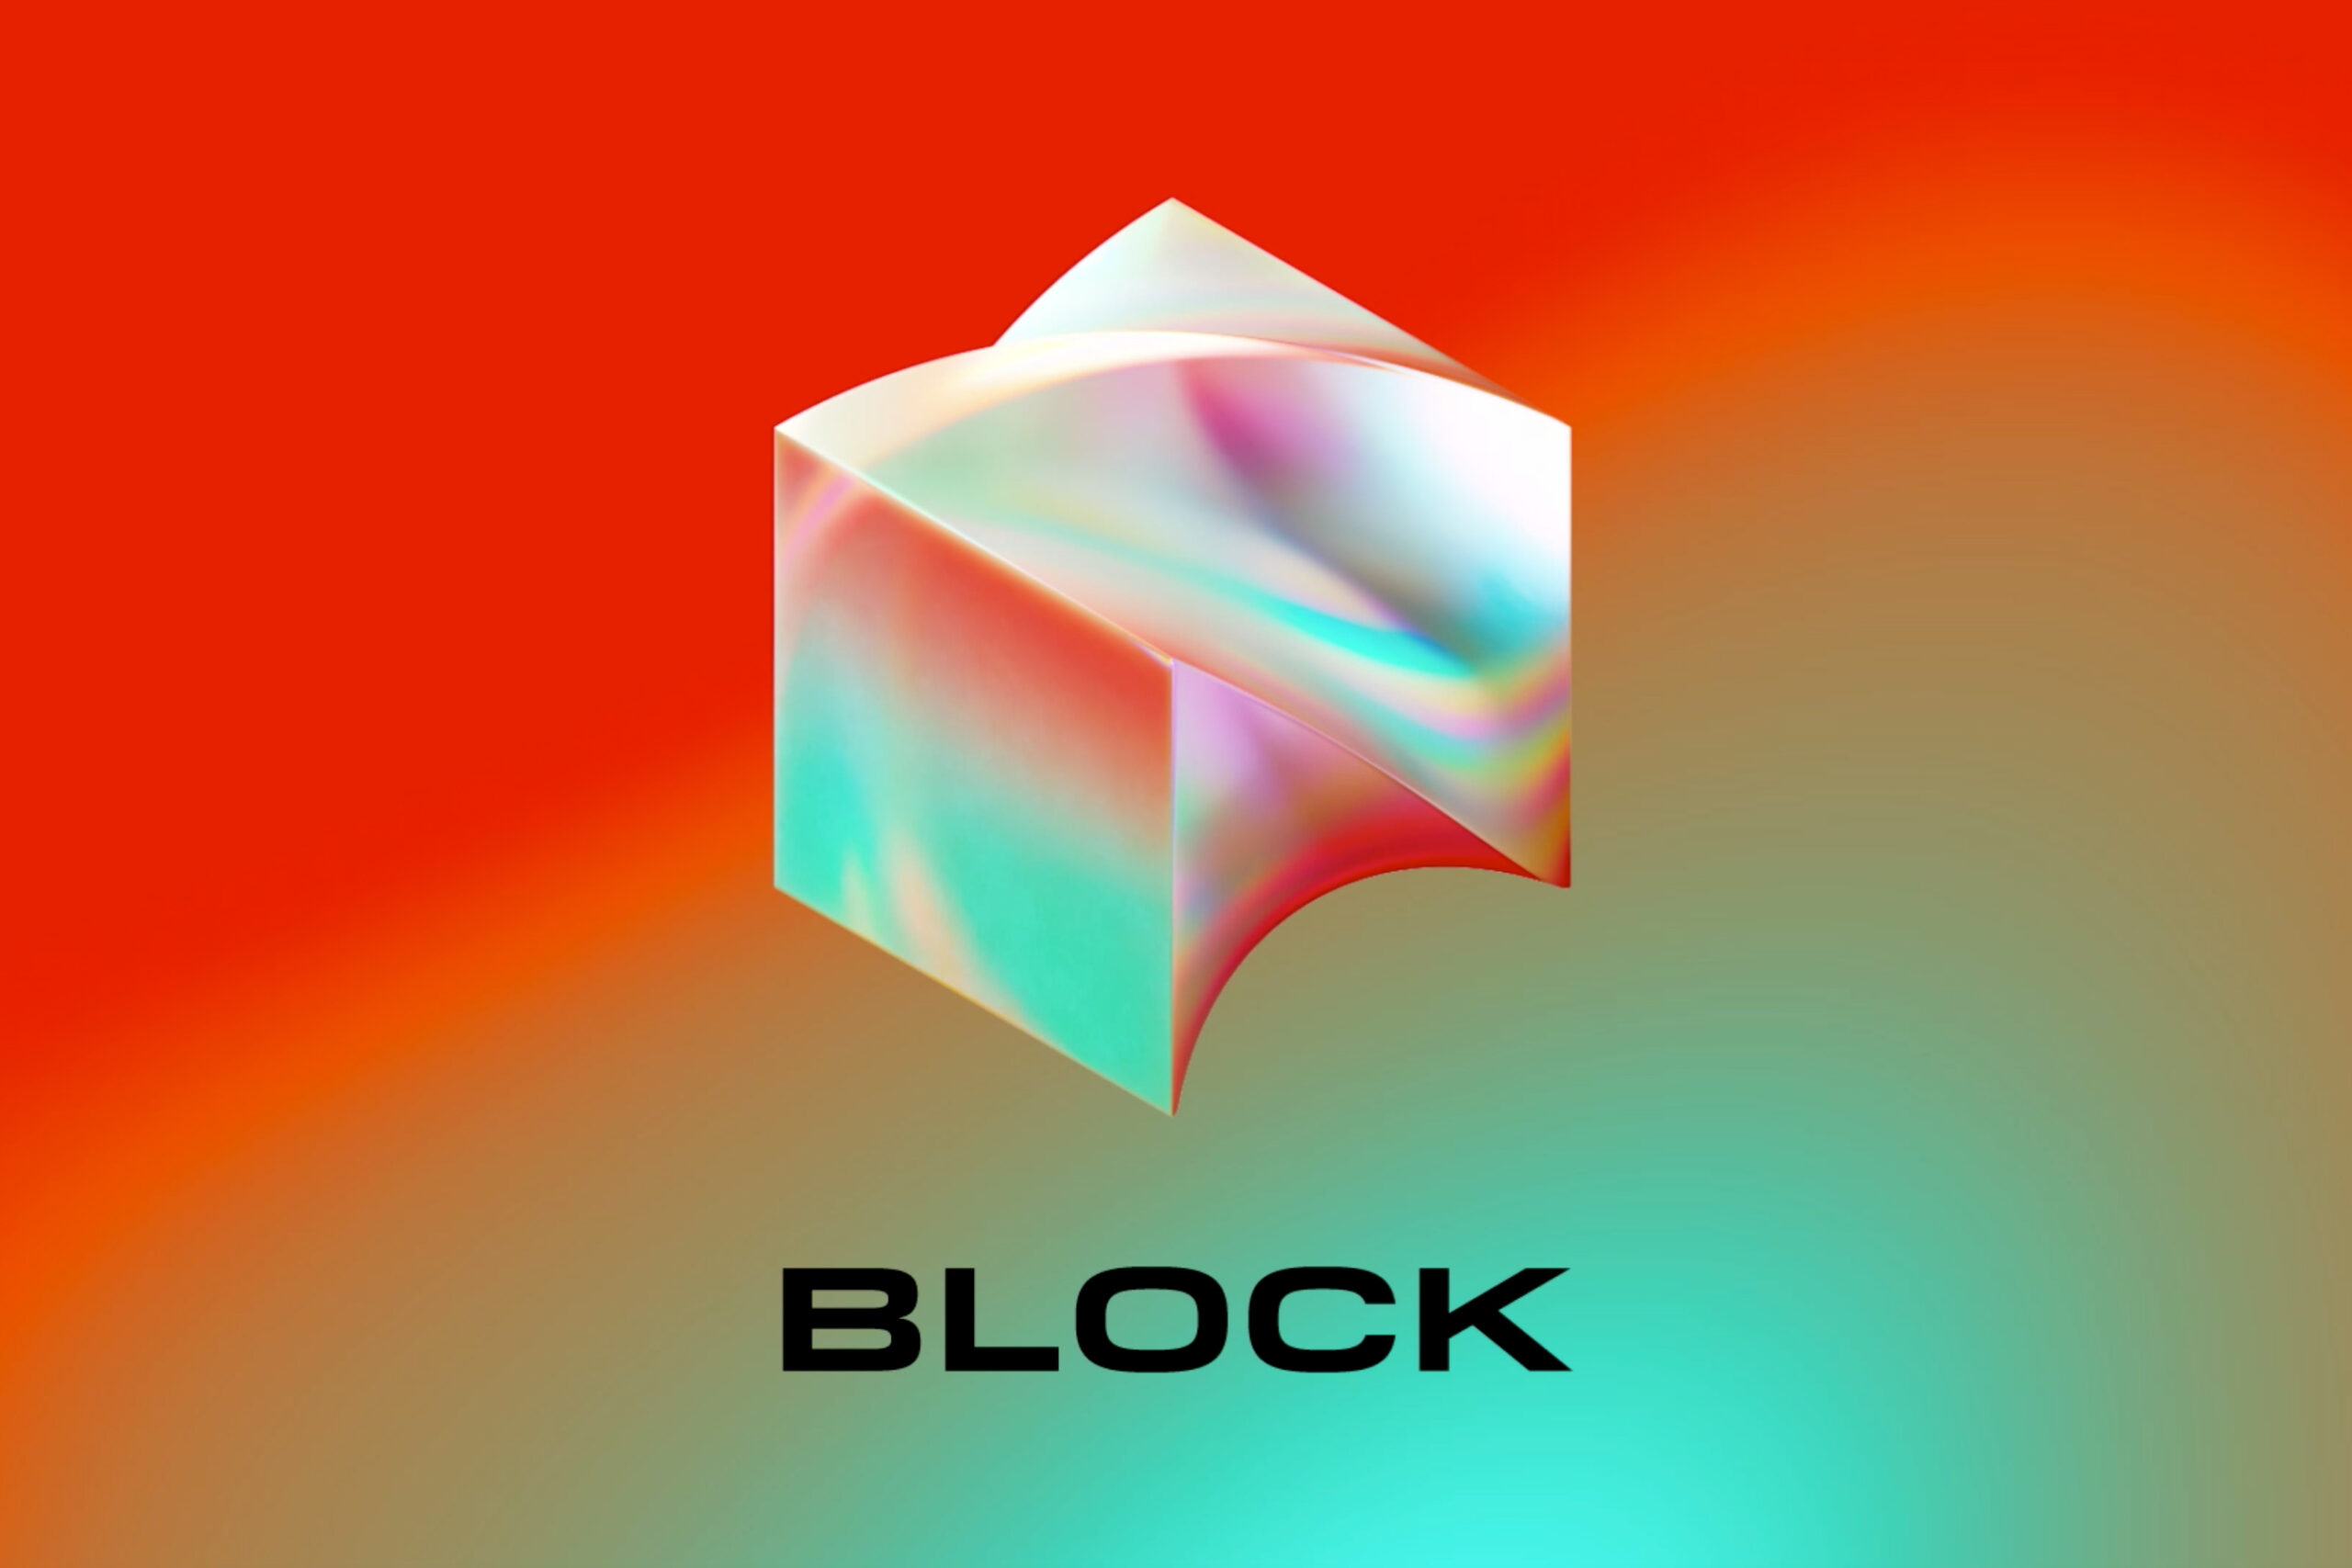 block-the-fintech-company-announces-layoffs-amidst-industry-turmoil